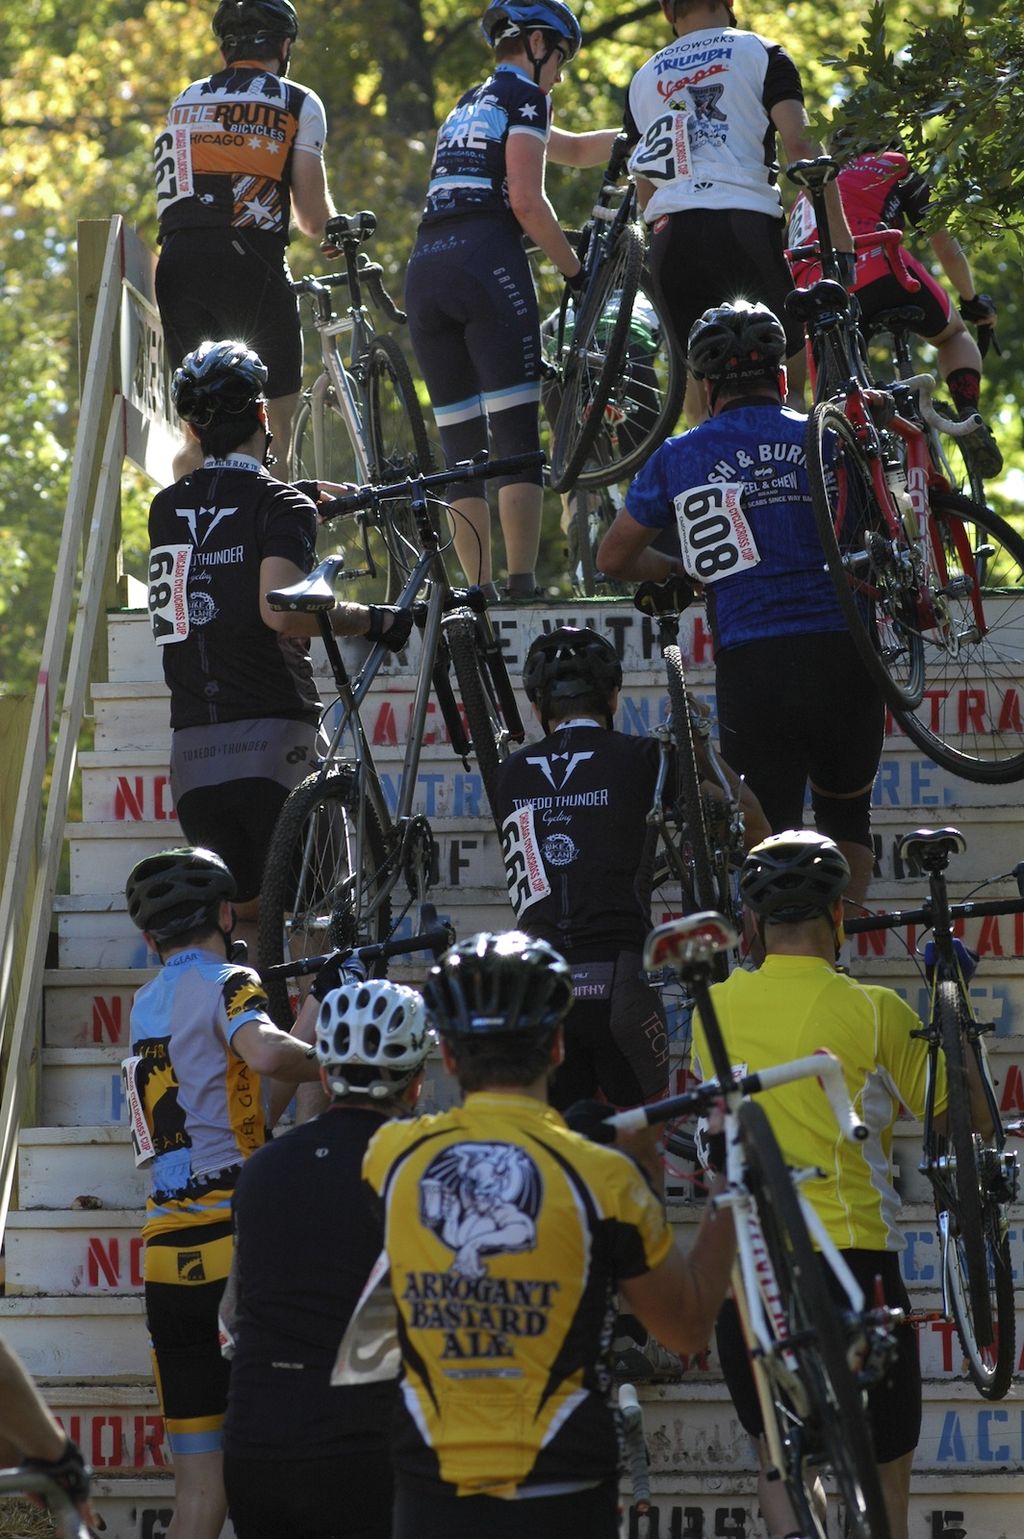 Chicago Cross Cup #2 Hopkins Park in Dekalb Illinois — Gallery, Results - Cyclocross ...1024 x 1539